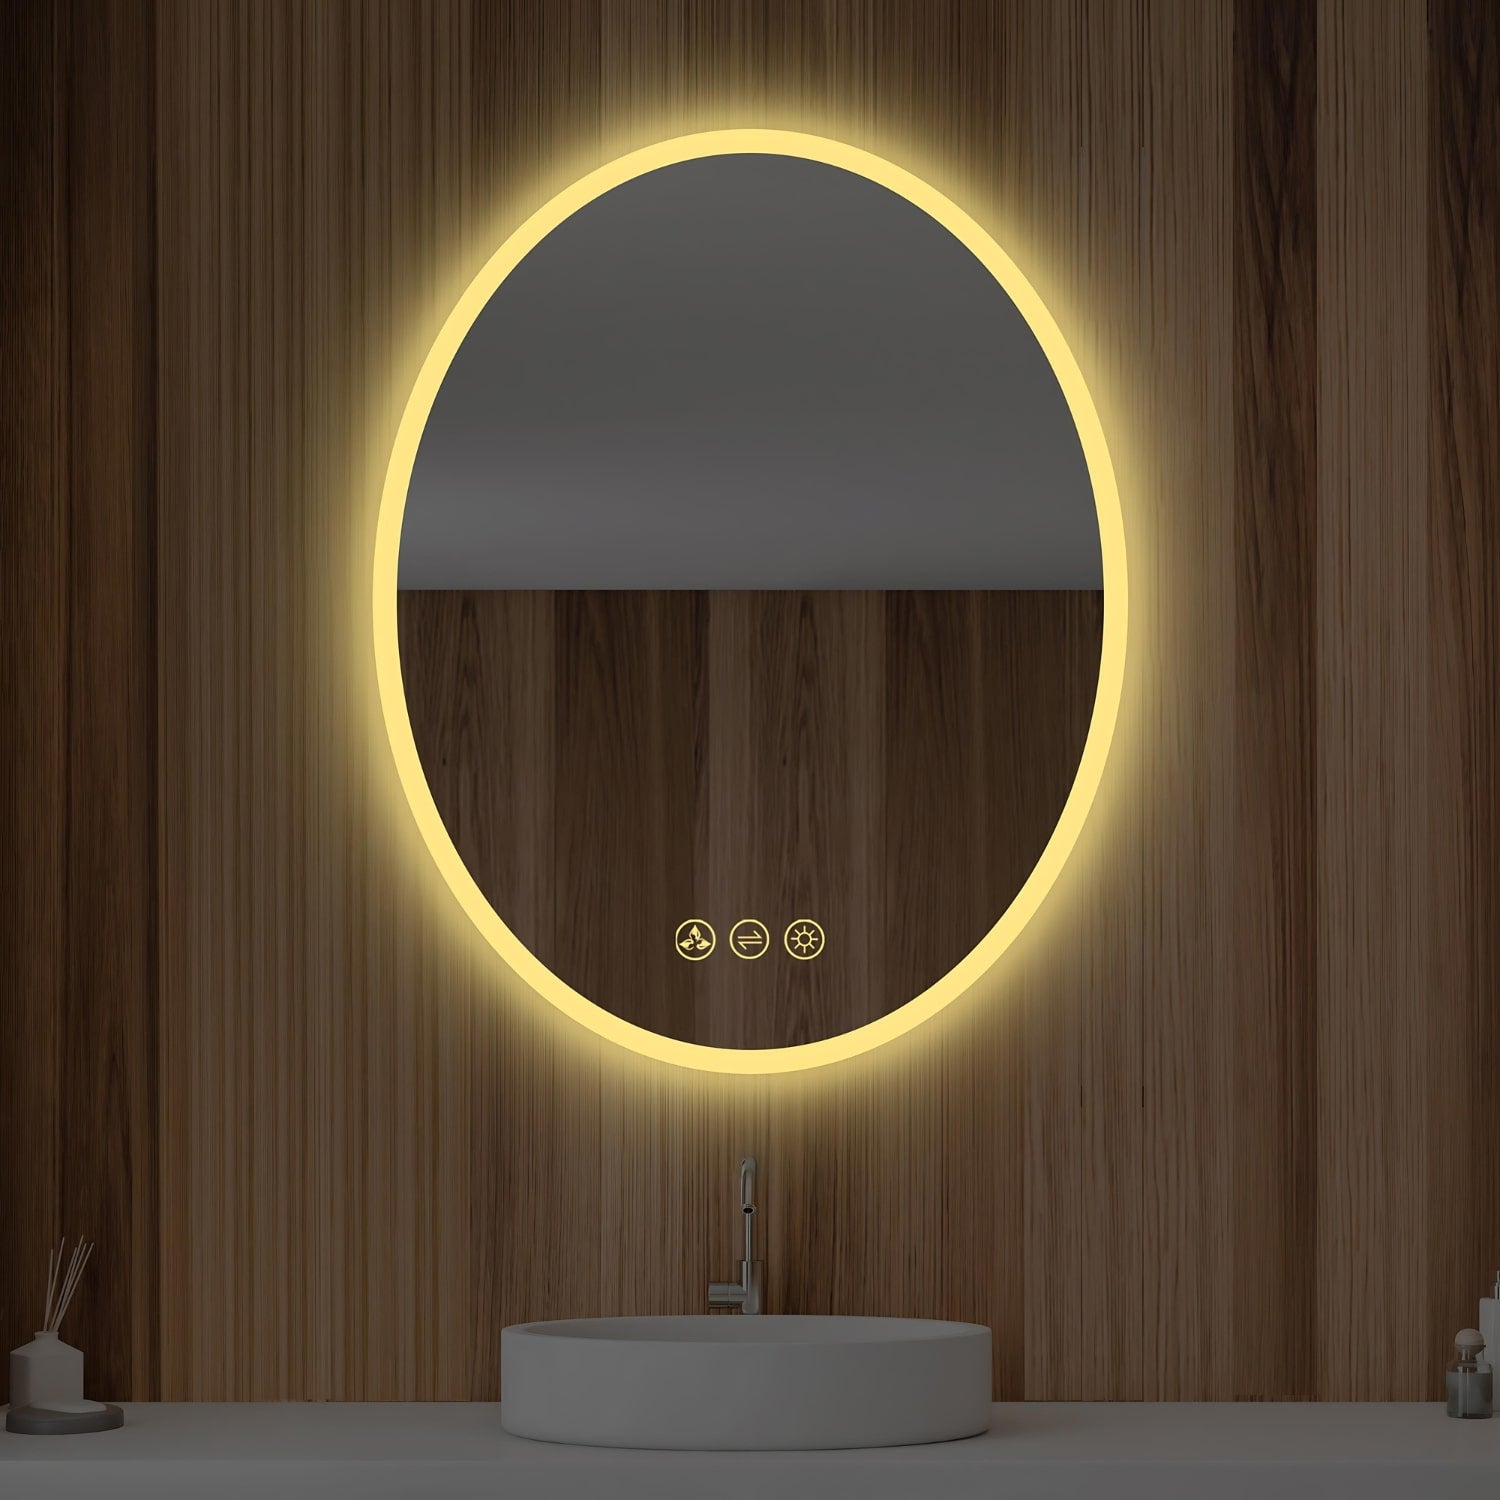 Illuminated Mirrors like the Oval from blossom will brighten up your space with beauty.